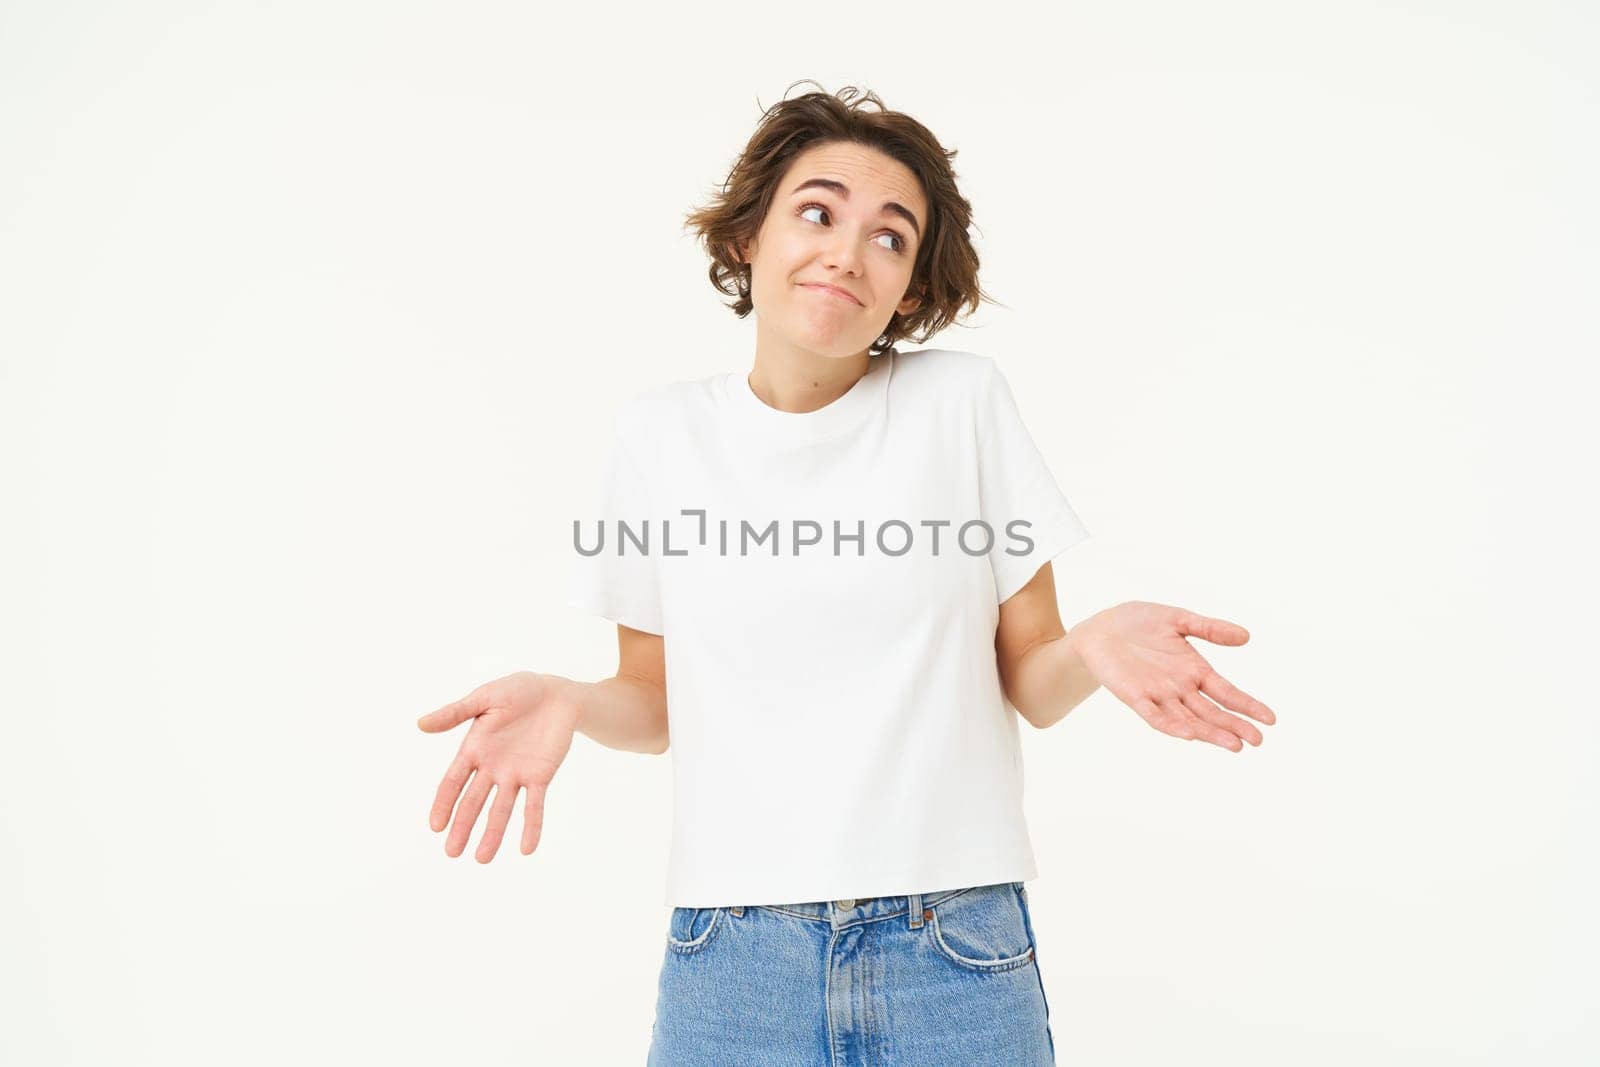 Portrait of woman spreads hands sideways and shrugs shoulders, looks clueless, dont know, stands unaware against white background.